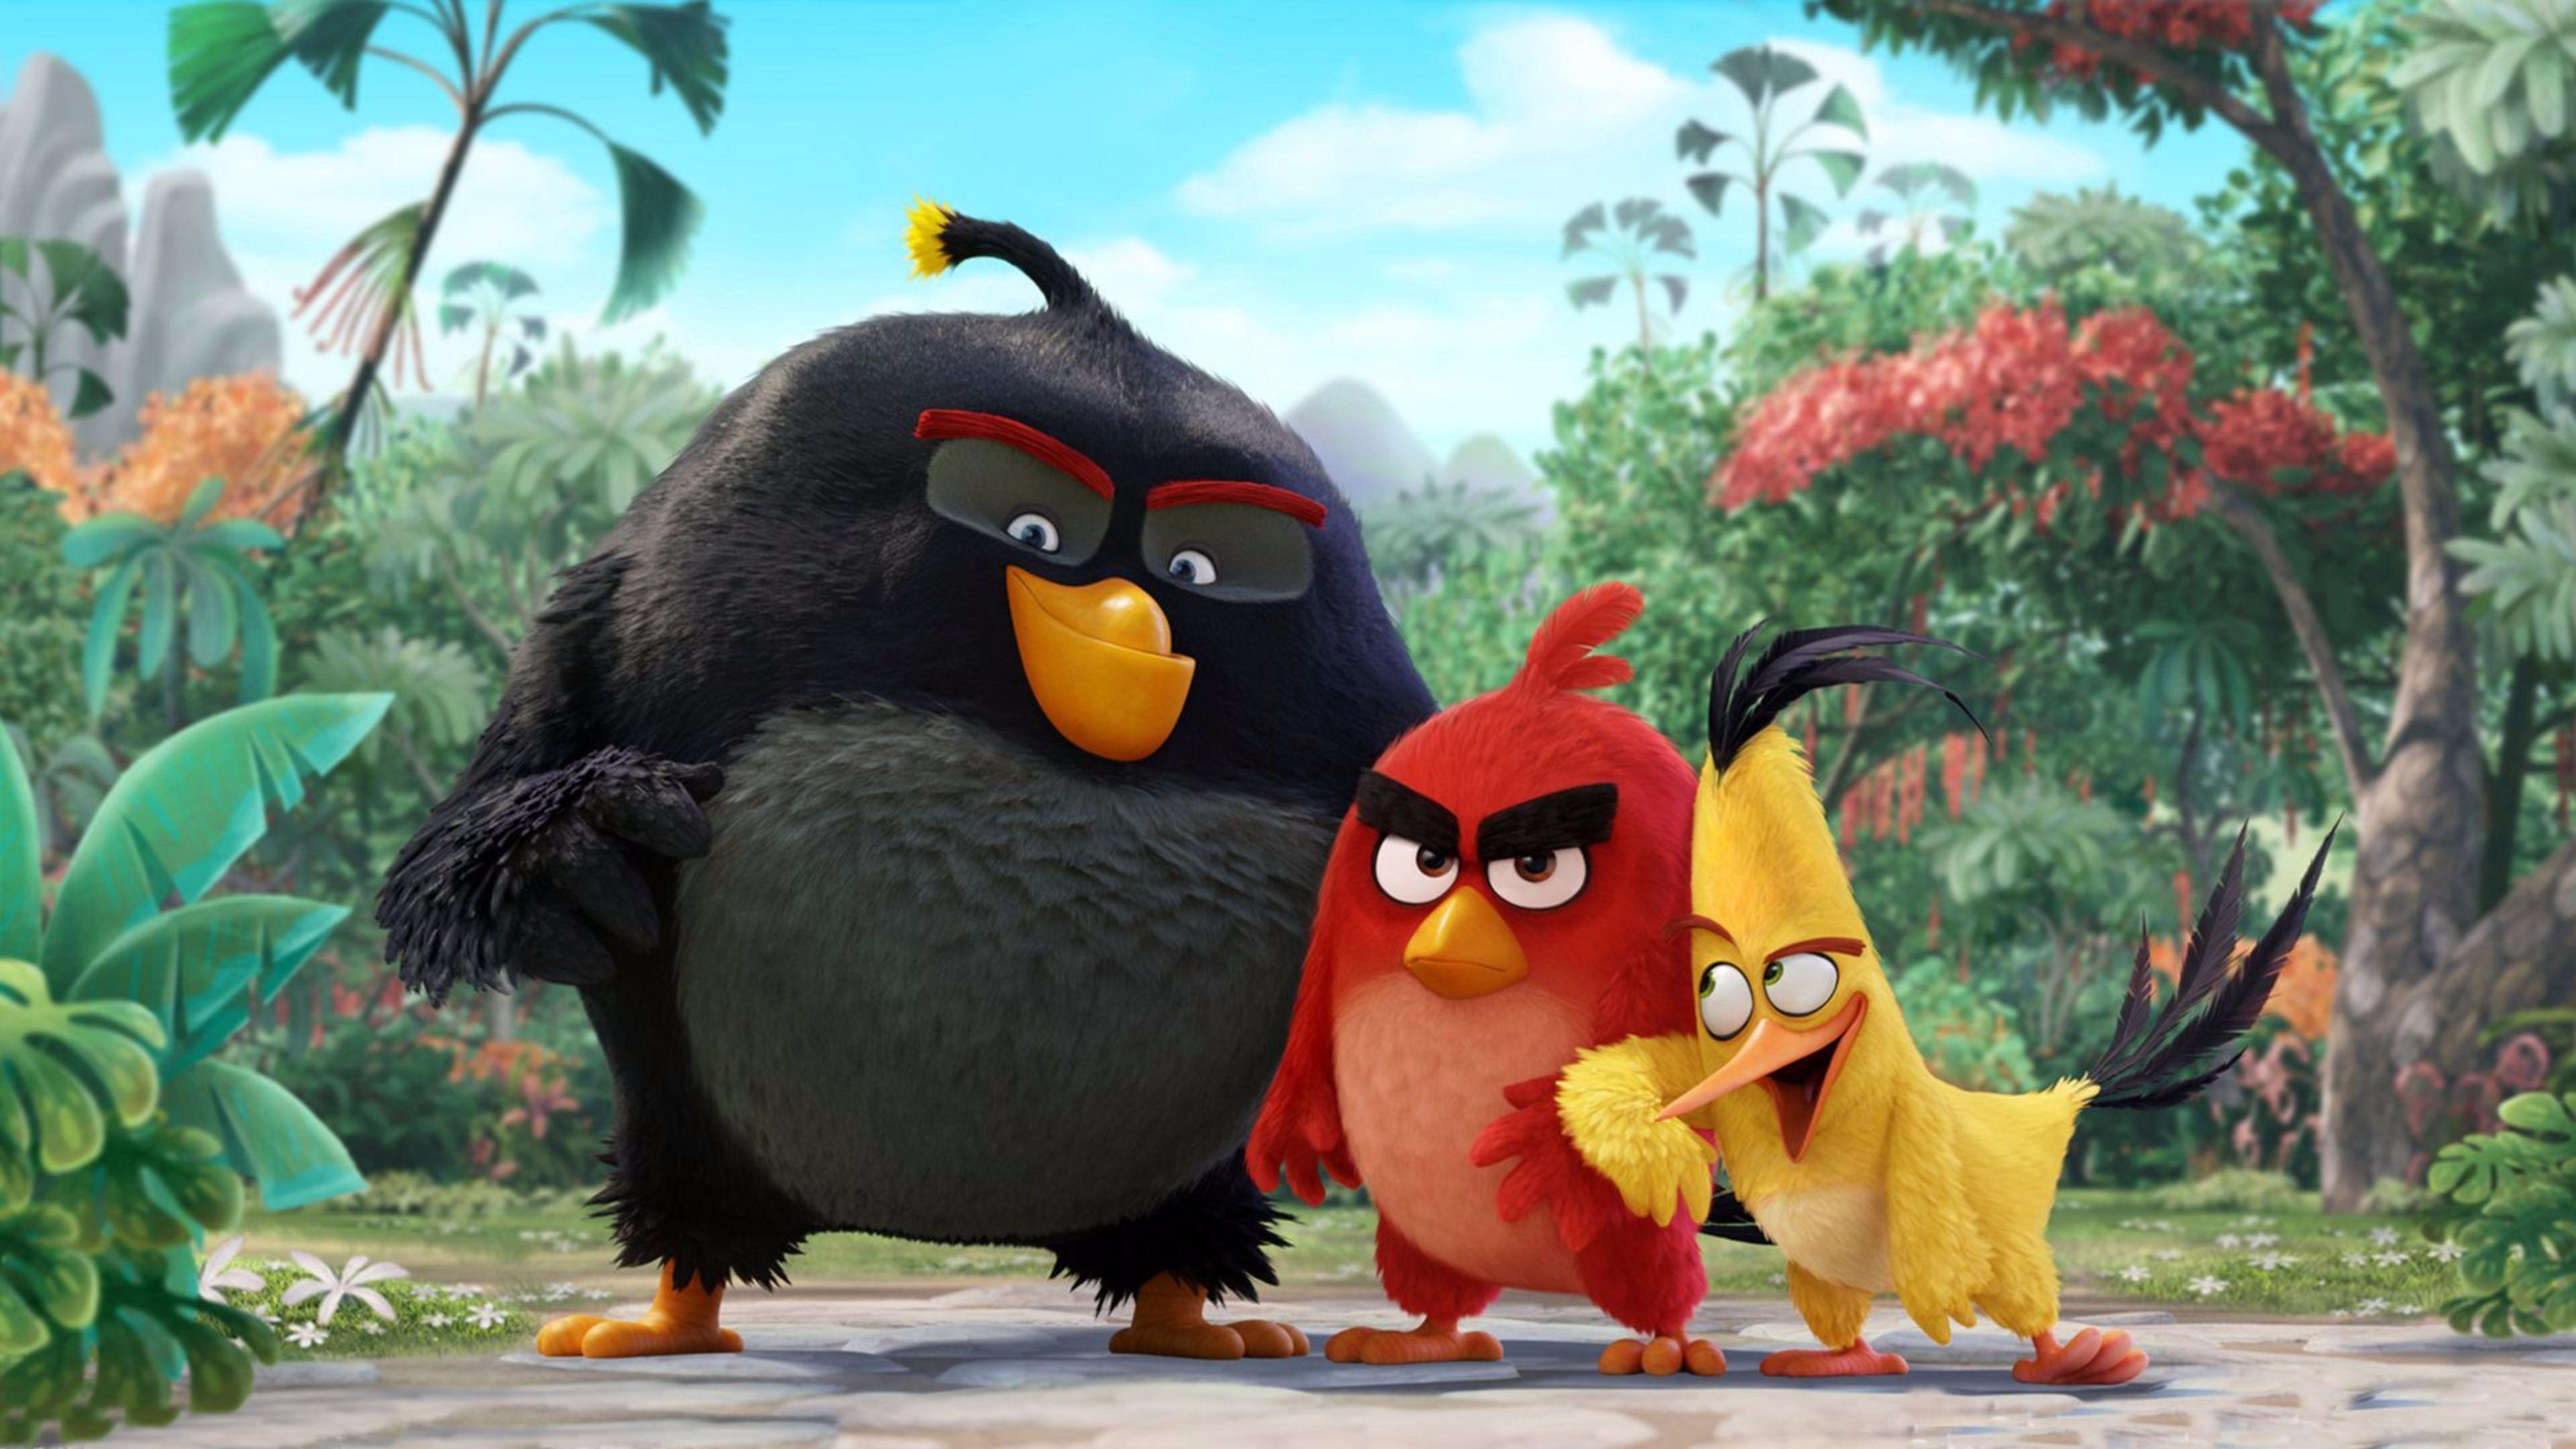 New The Angry Birds Movie 4K Wallpaper. Free 4K Wallpaper